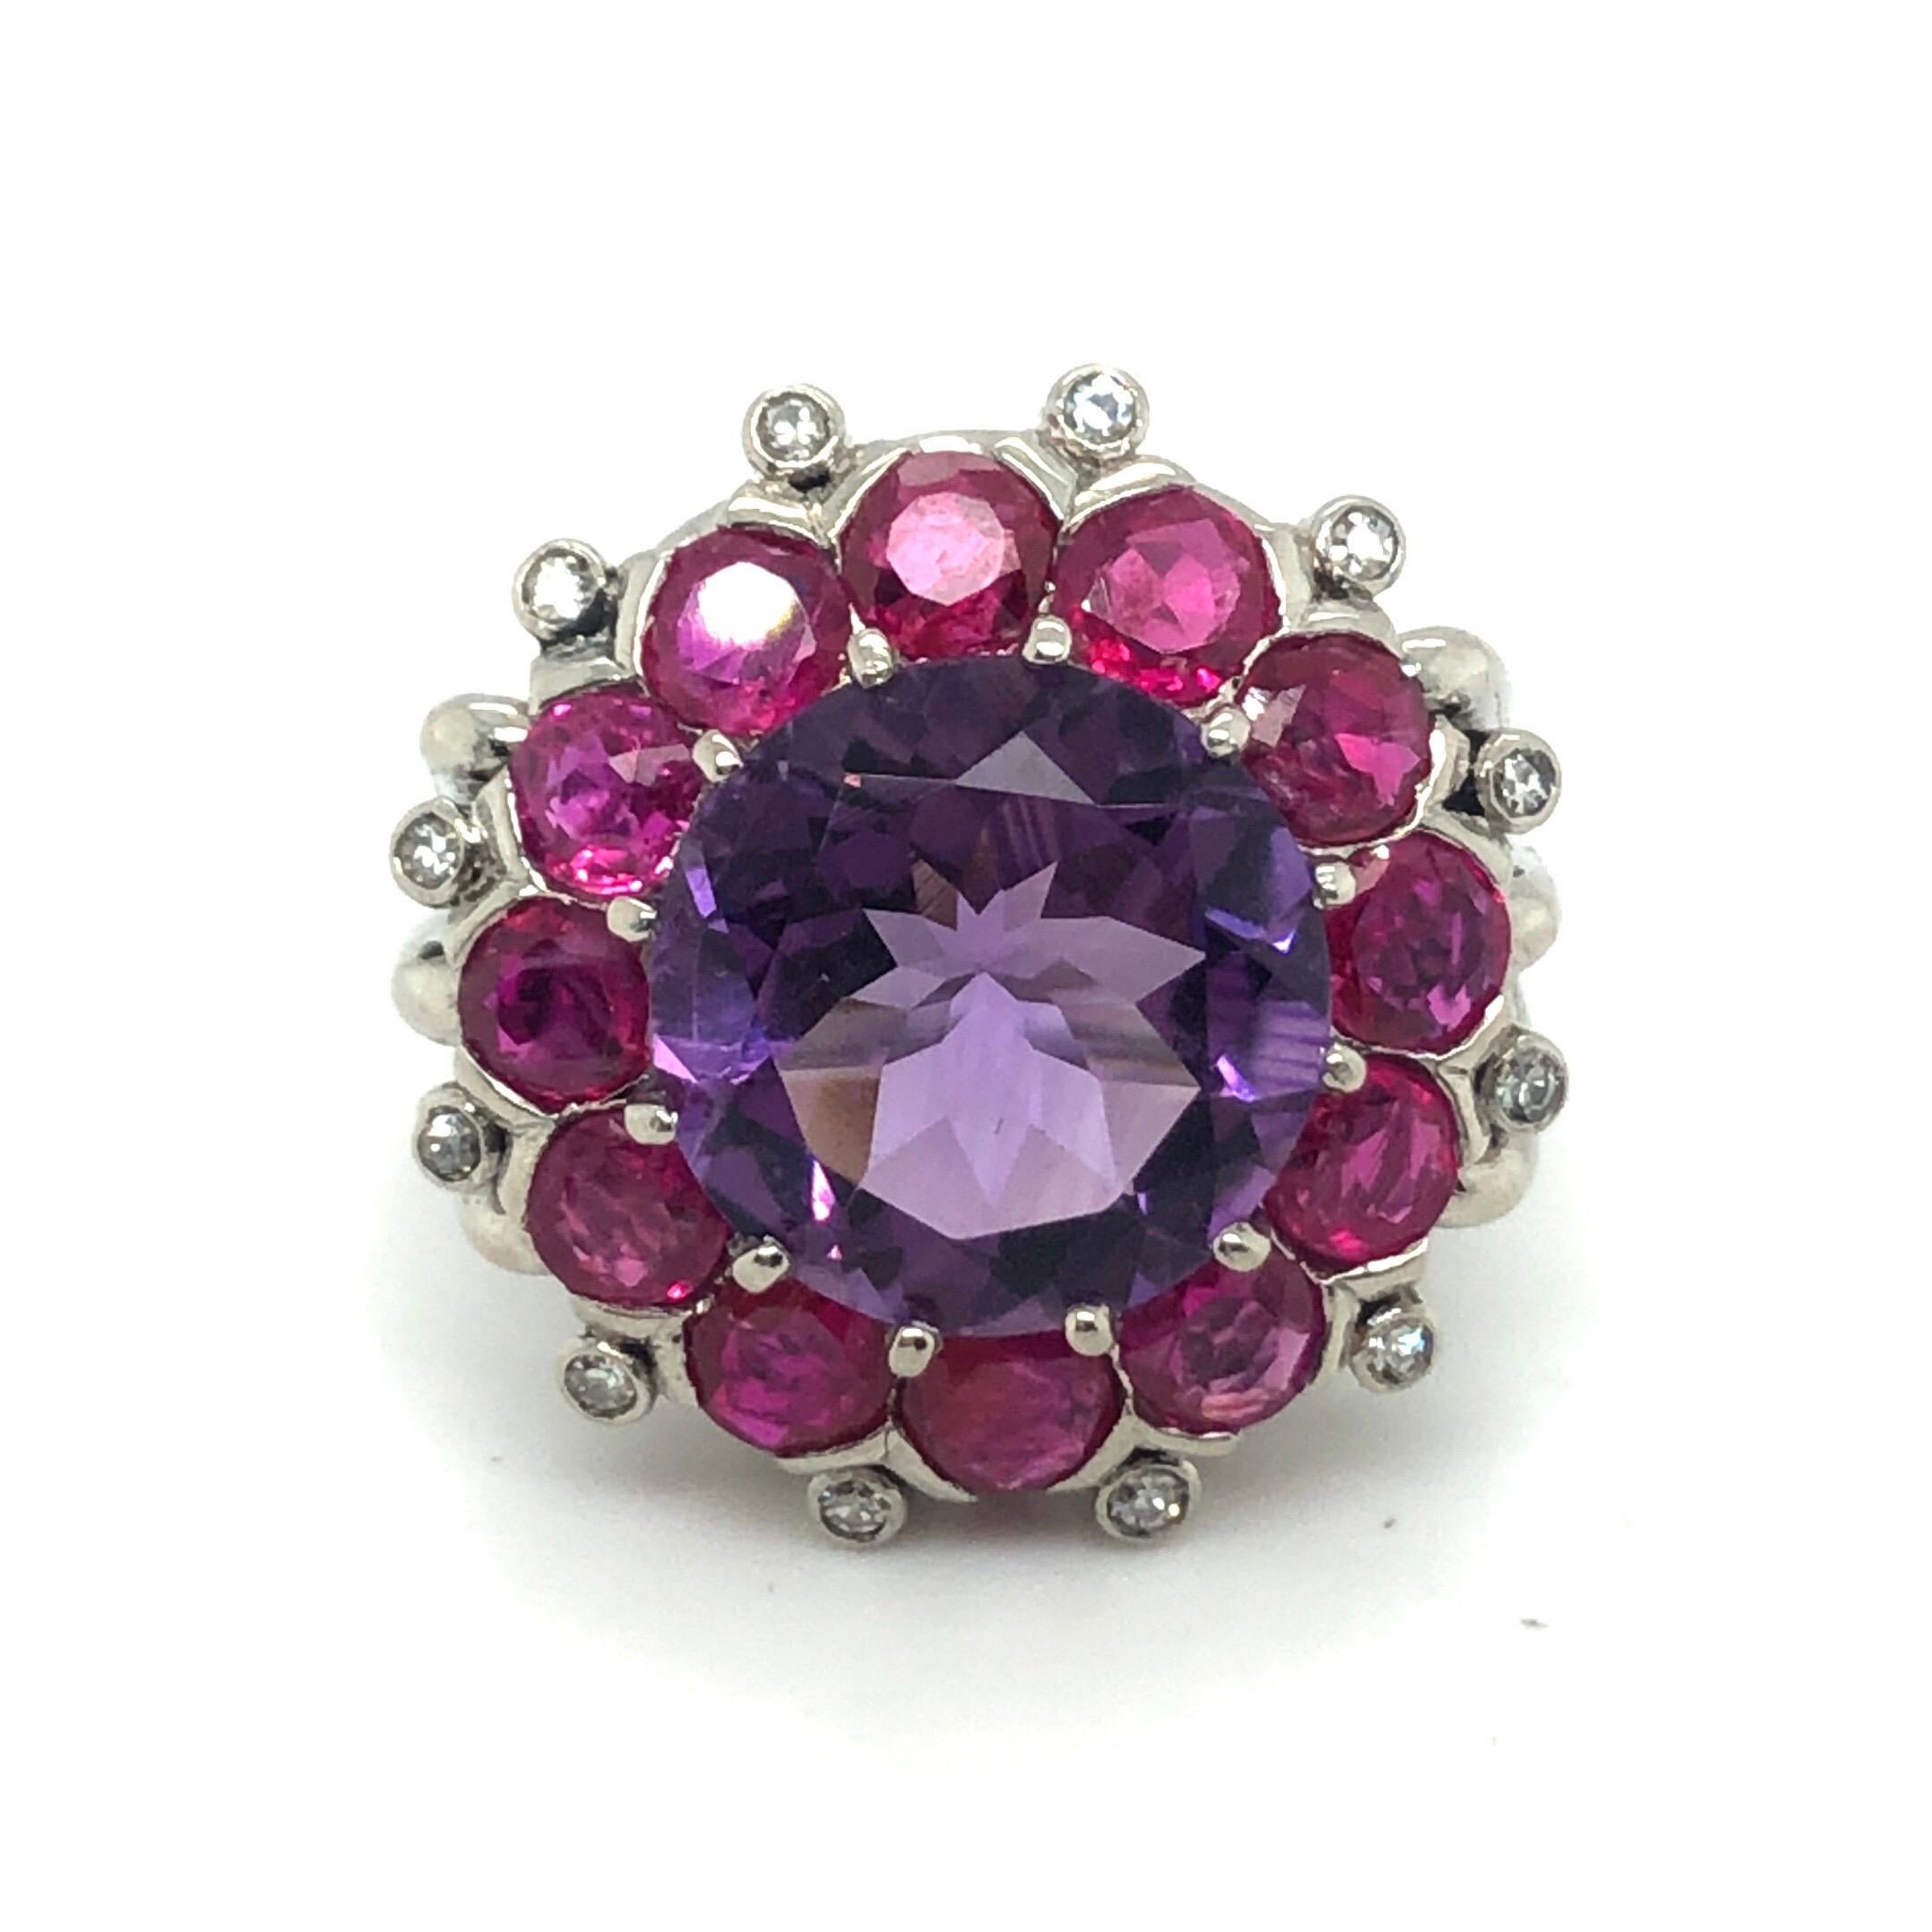 Festive 18 karat white gold amethyst ruby and diamond cocktail ring.
Cocktail ring set with a round amethyst of circa 5 carats surrounded by an entourage consisting of 12 round rubies totalling circa 4.20 carats and 12 single-cut diamonds totalling